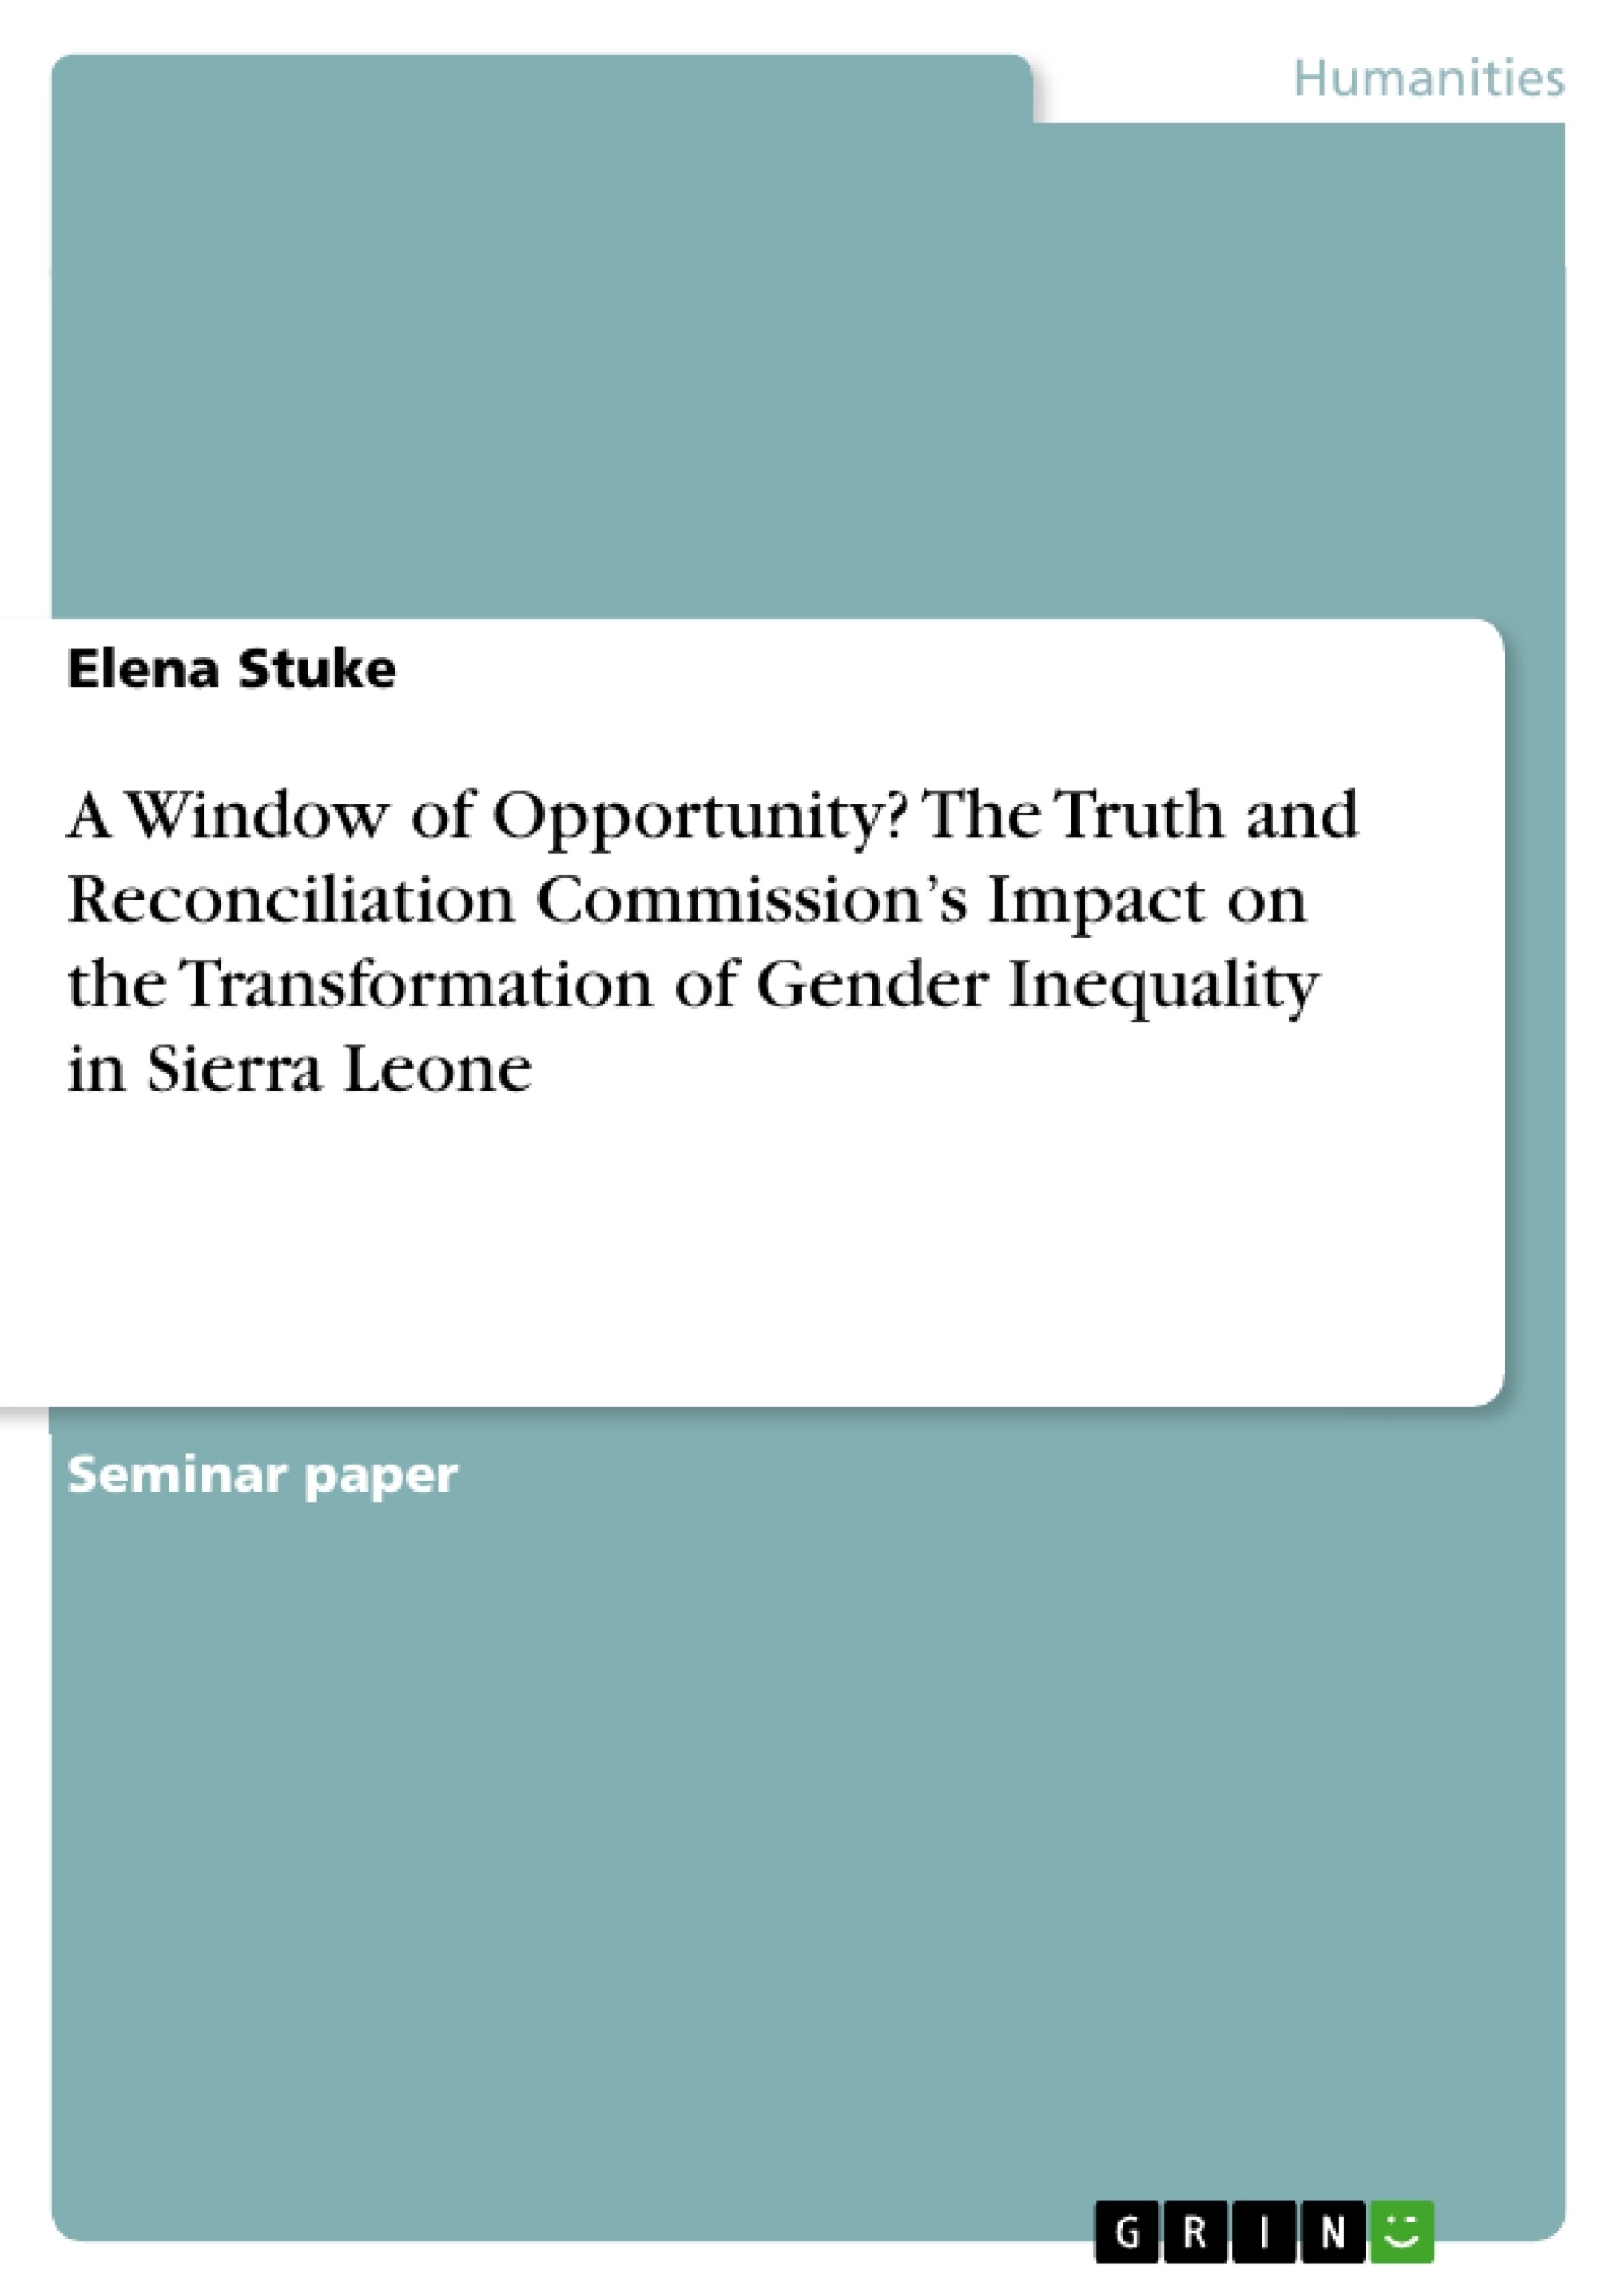 Title: A Window of Opportunity? The Truth and Reconciliation Commission’s Impact on the Transformation of Gender Inequality in Sierra Leone